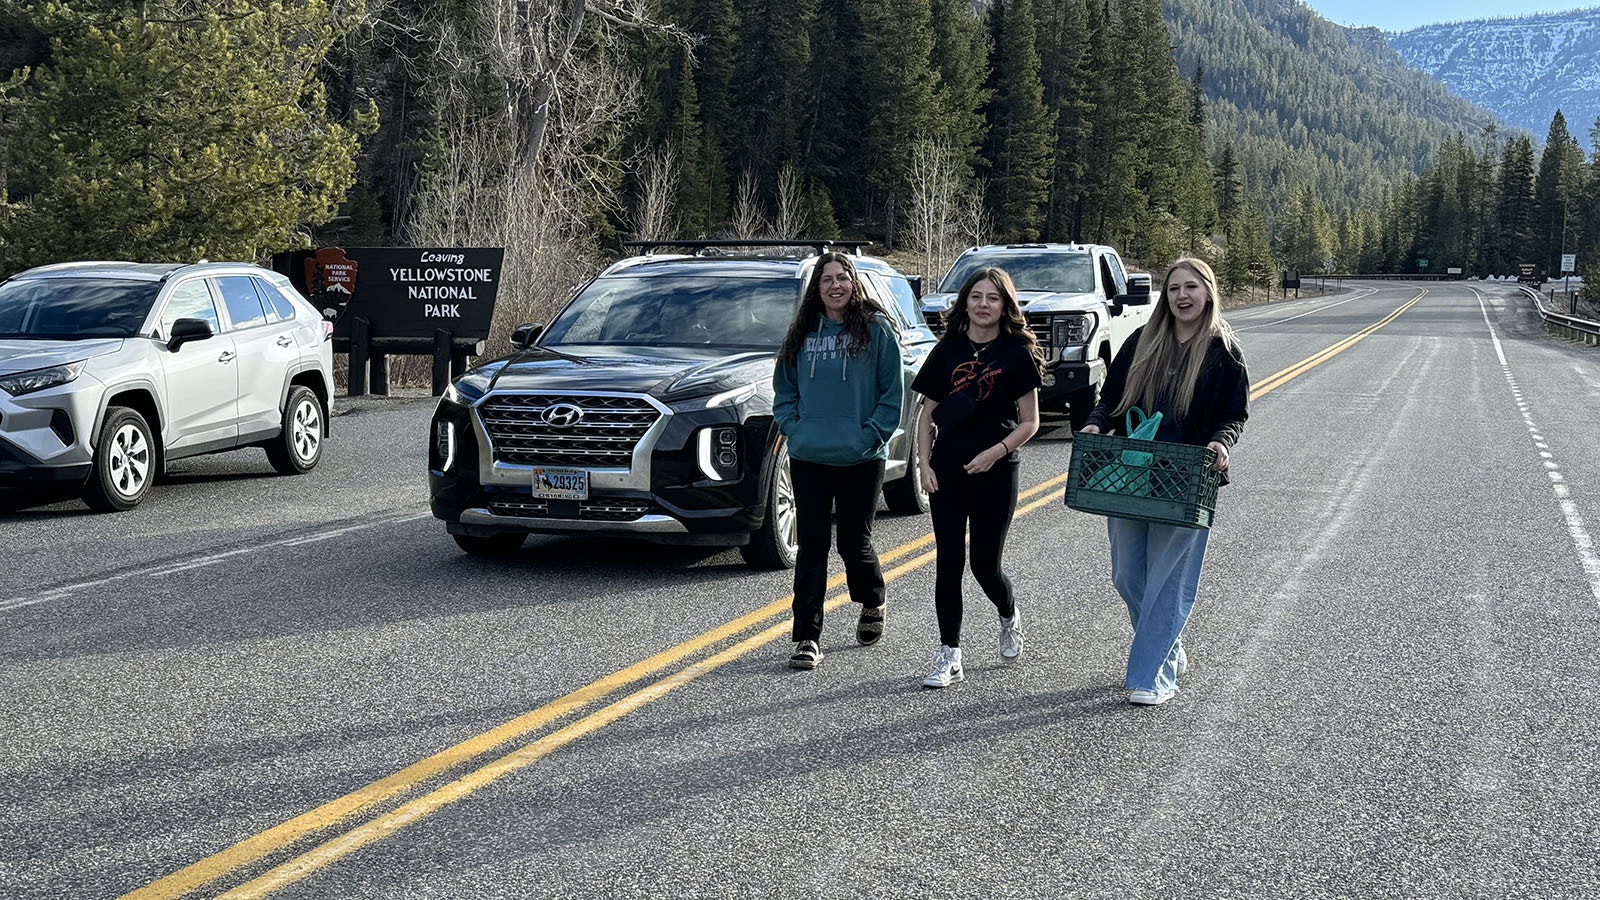 Stacy, Hailey, and Grace after handing out carrot cake to the line of vehicles waiting to go through the East Entrance of Yellowstone National Park.